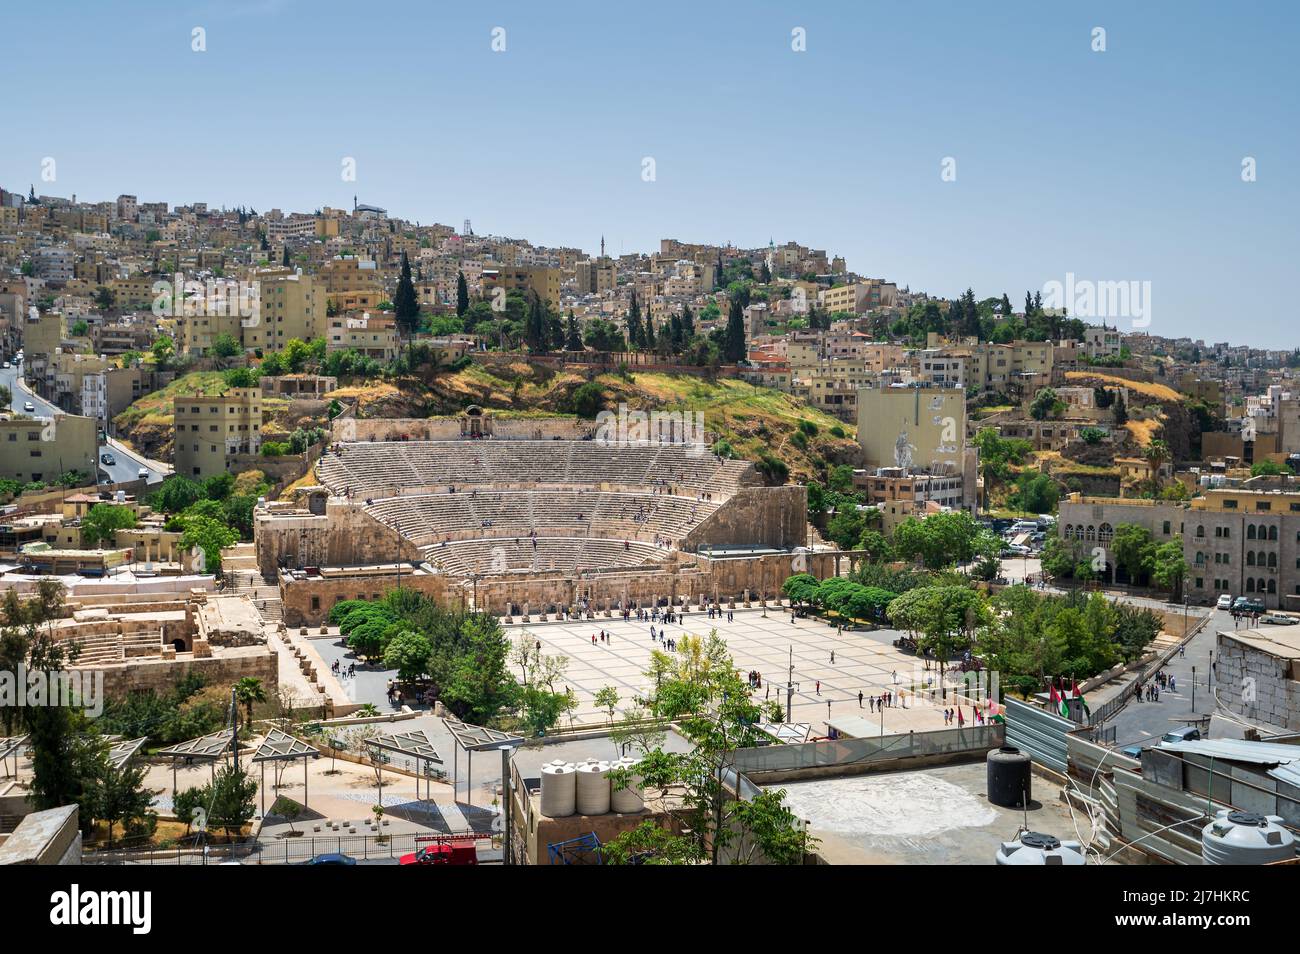 Amman downtown skyline in Jordan dominated by ancient Roman theater structure among residential houses in the old city center Stock Photo